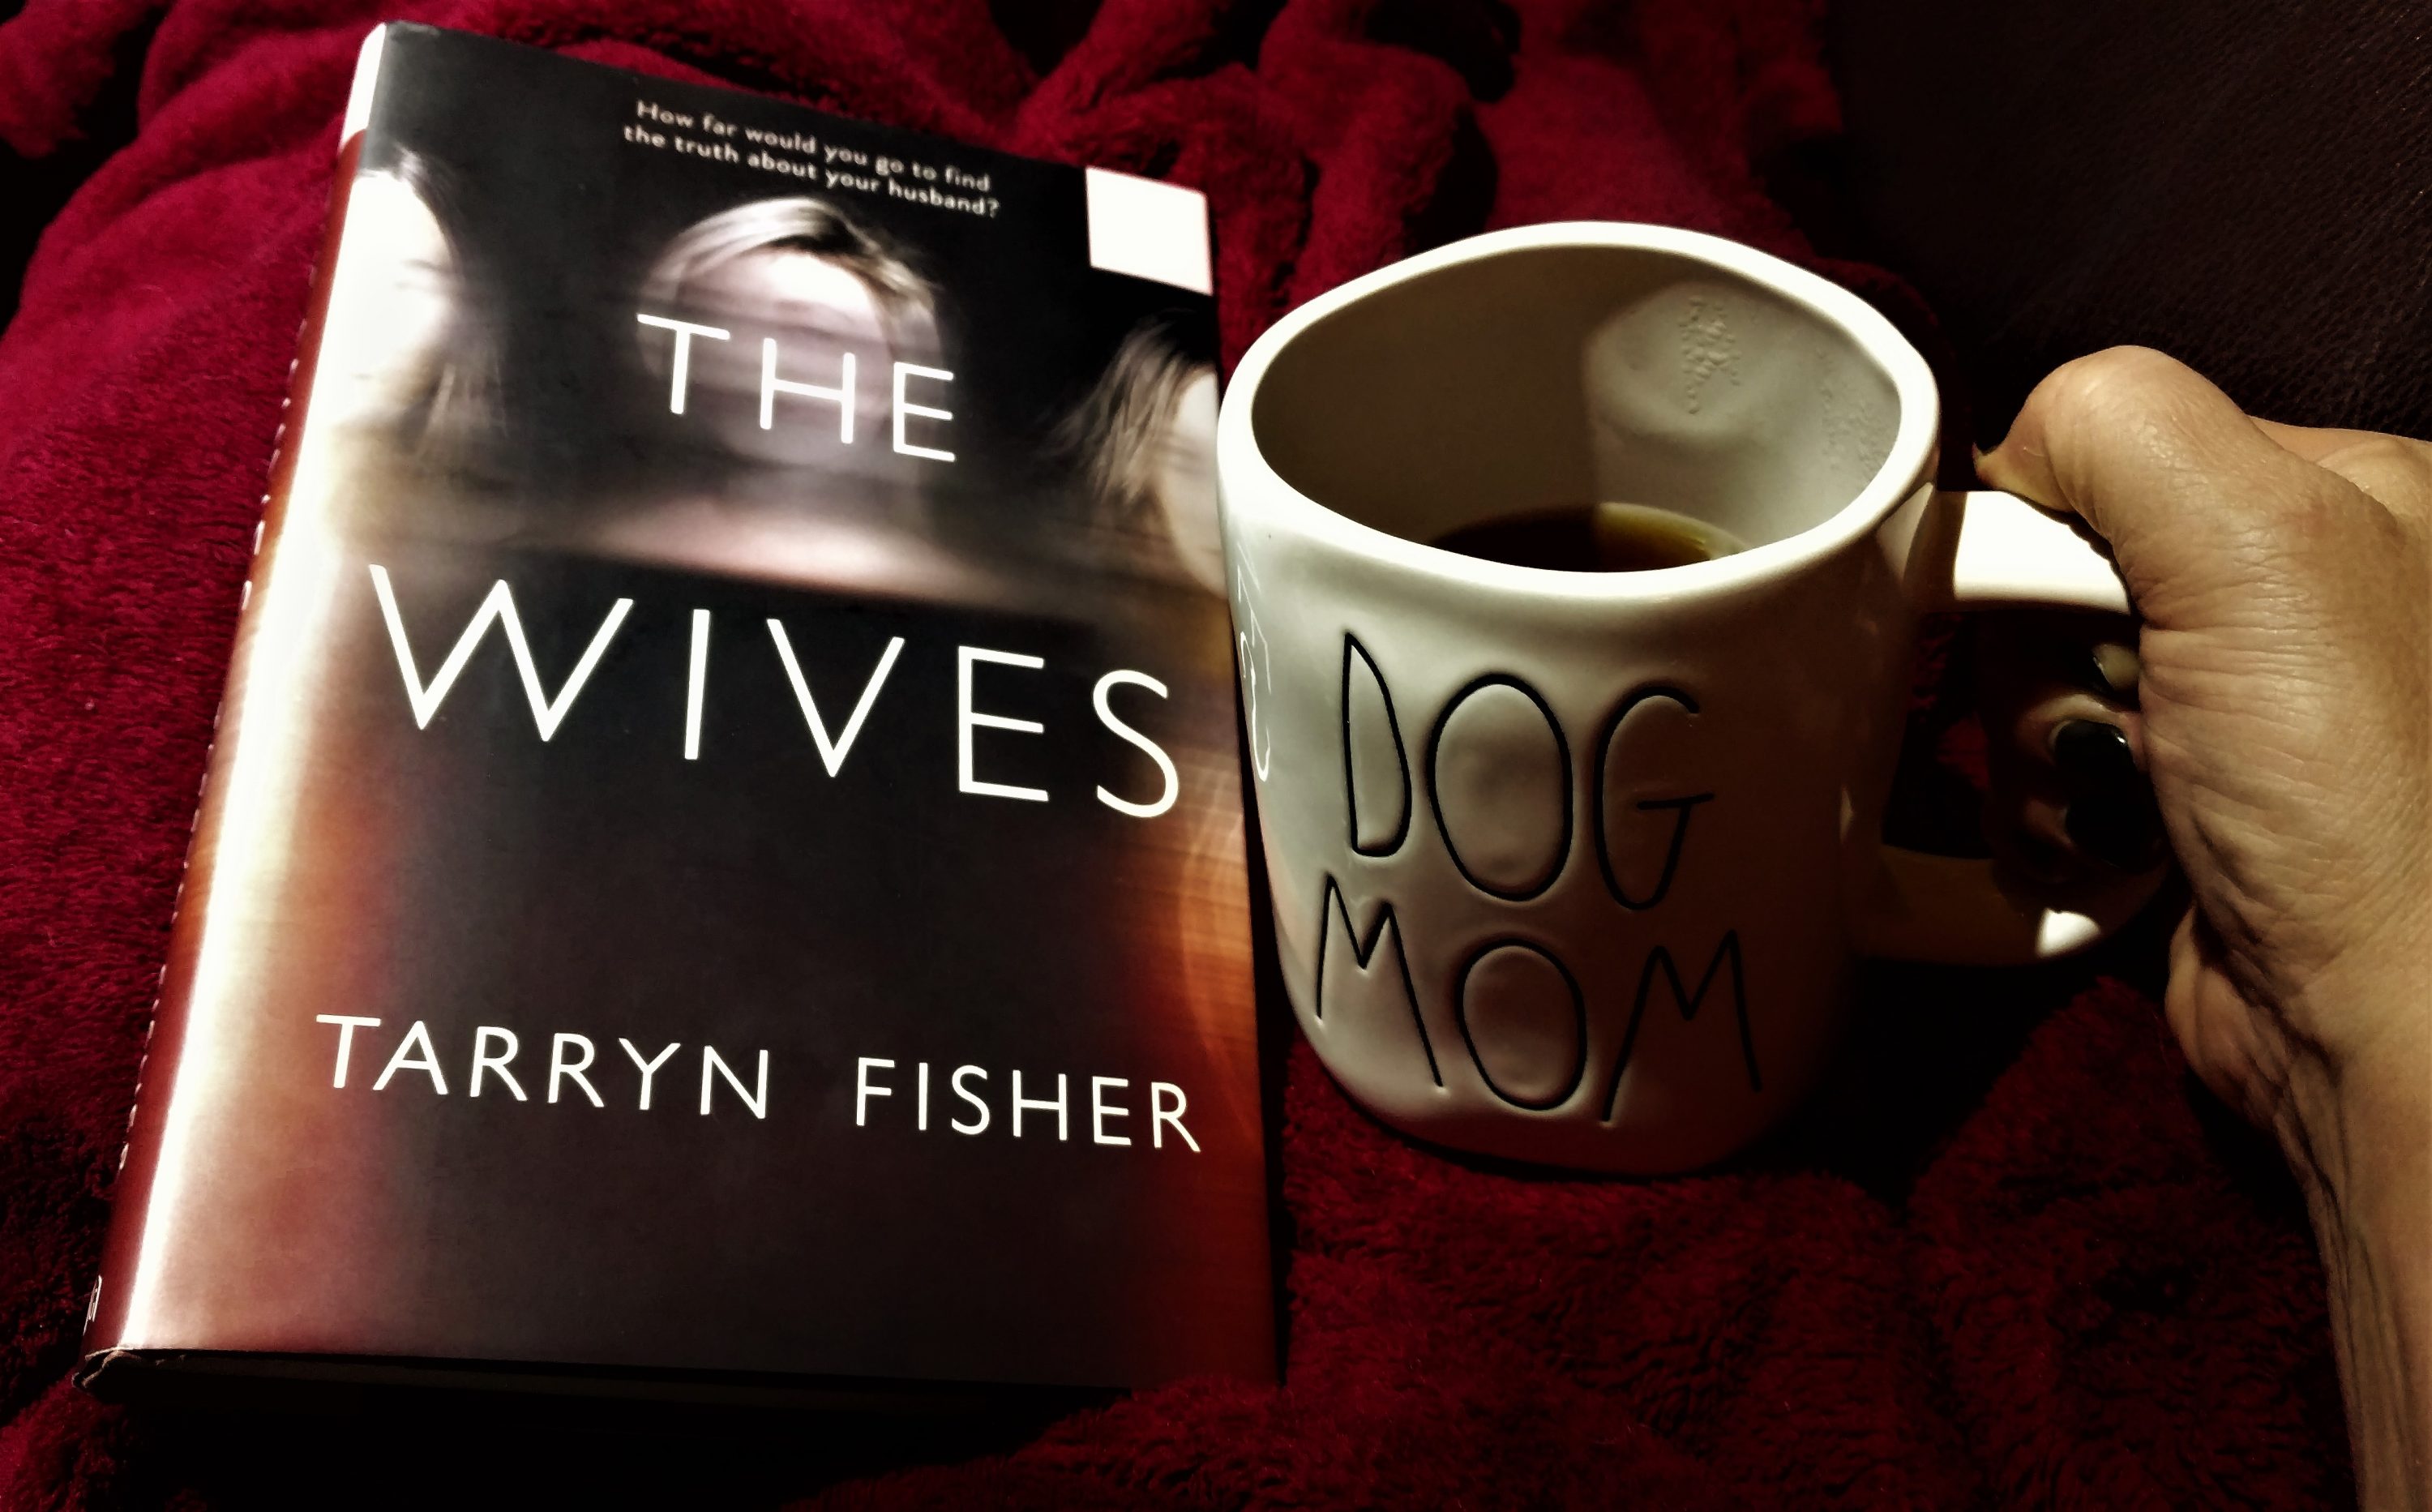 The Wives, Tarryn Fisher, Dog Mom Mug, Book of the Month Review